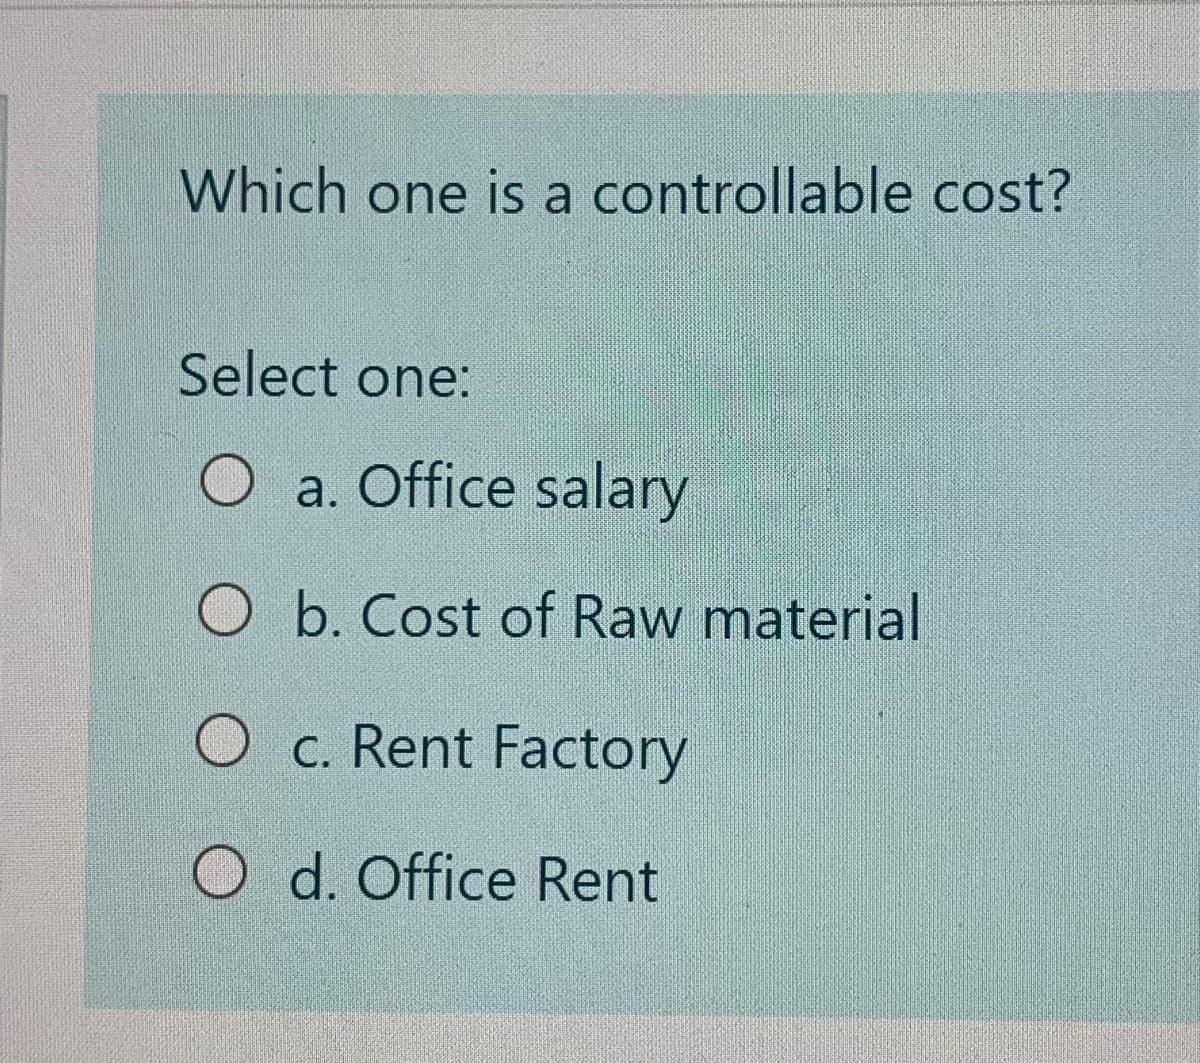 Which one is a controllable cost?
Select one:
a. Office salary
O b. Cost of Raw material
O c. Rent Factory
O d. Office Rent
